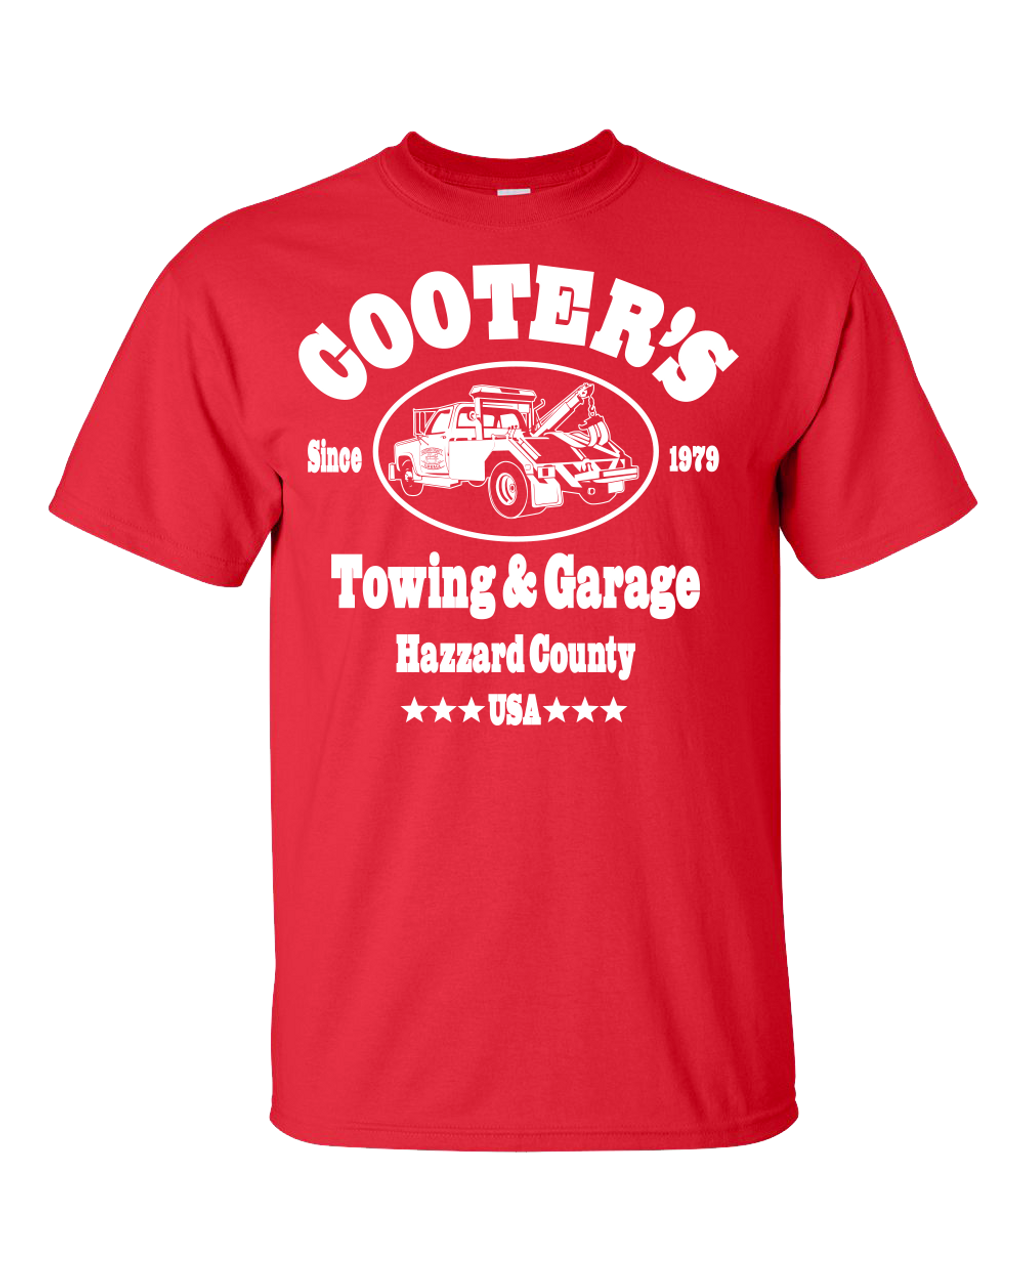 Towing and Garage T-Shirt